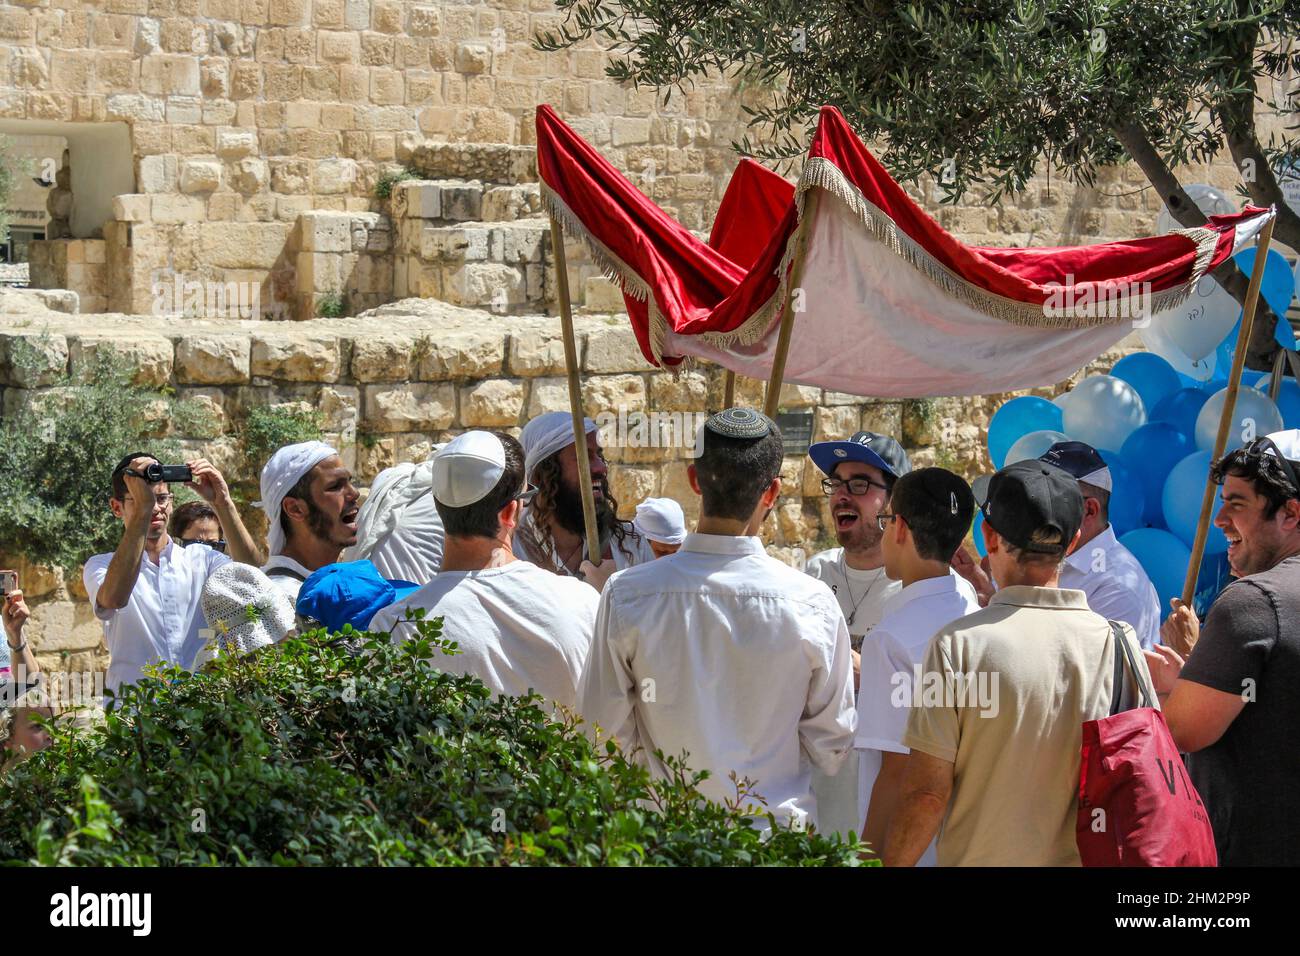 Participants in a Jewish Bar Mitzvah celebration carry a chuppah near the Walls of the Temple Mount in Jerusalem, Israel, 2016 Stock Photo